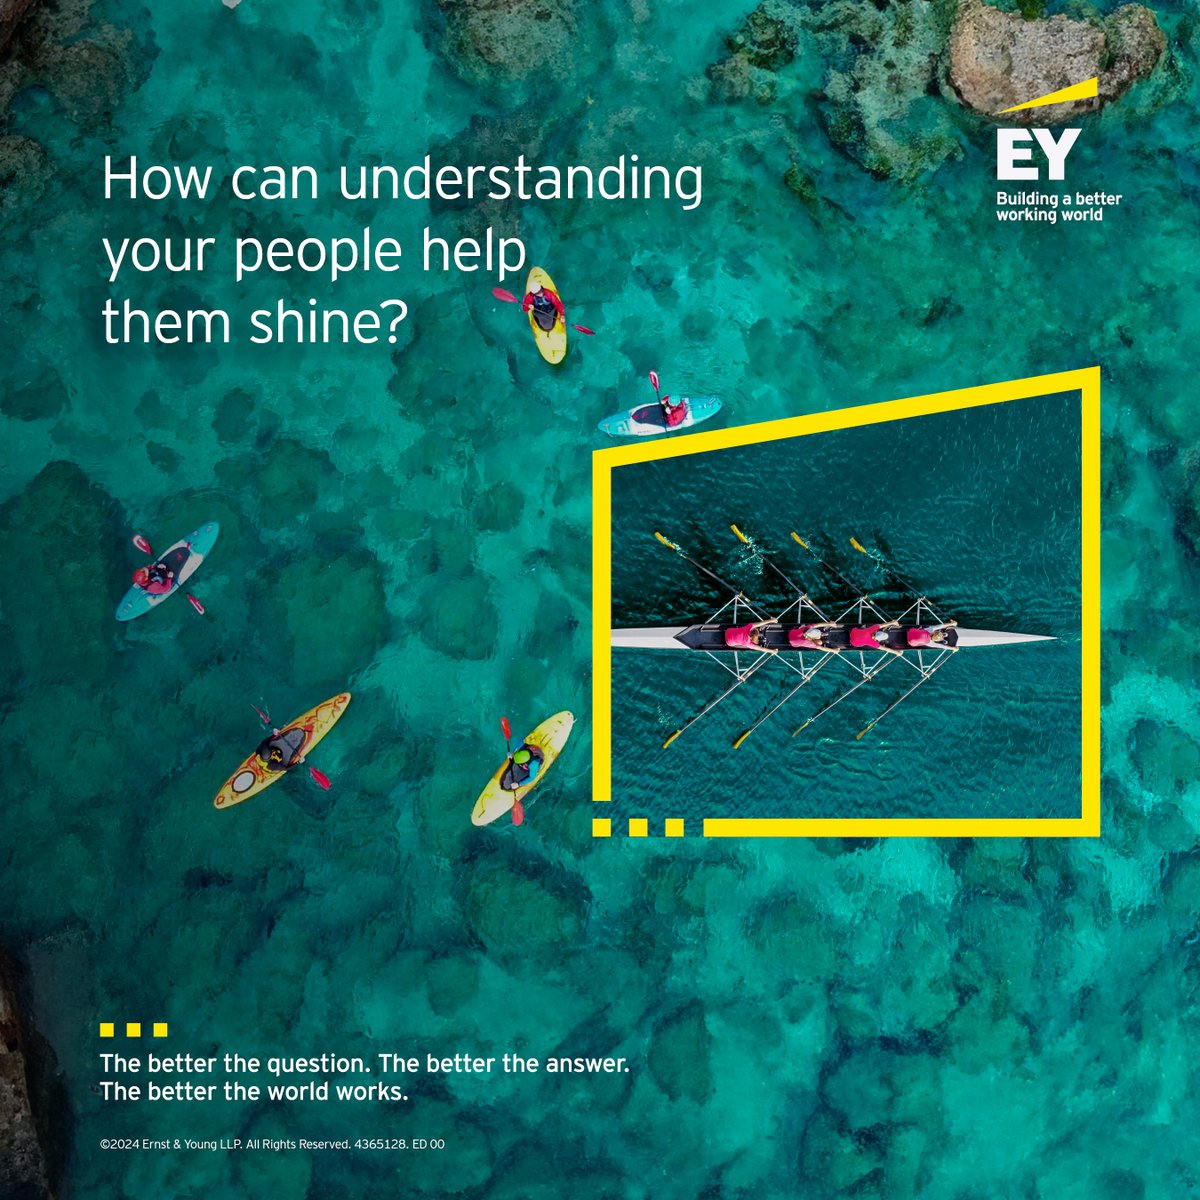 In a recent EY study, 91% of respondents said empathy in the workplace is important. In this article, EY thought leaders share that when employees feel connected, trusted and heard, they can unleash their full potential. Read more. ✍️go.ey.com/4avxVJ0

#EYCanada